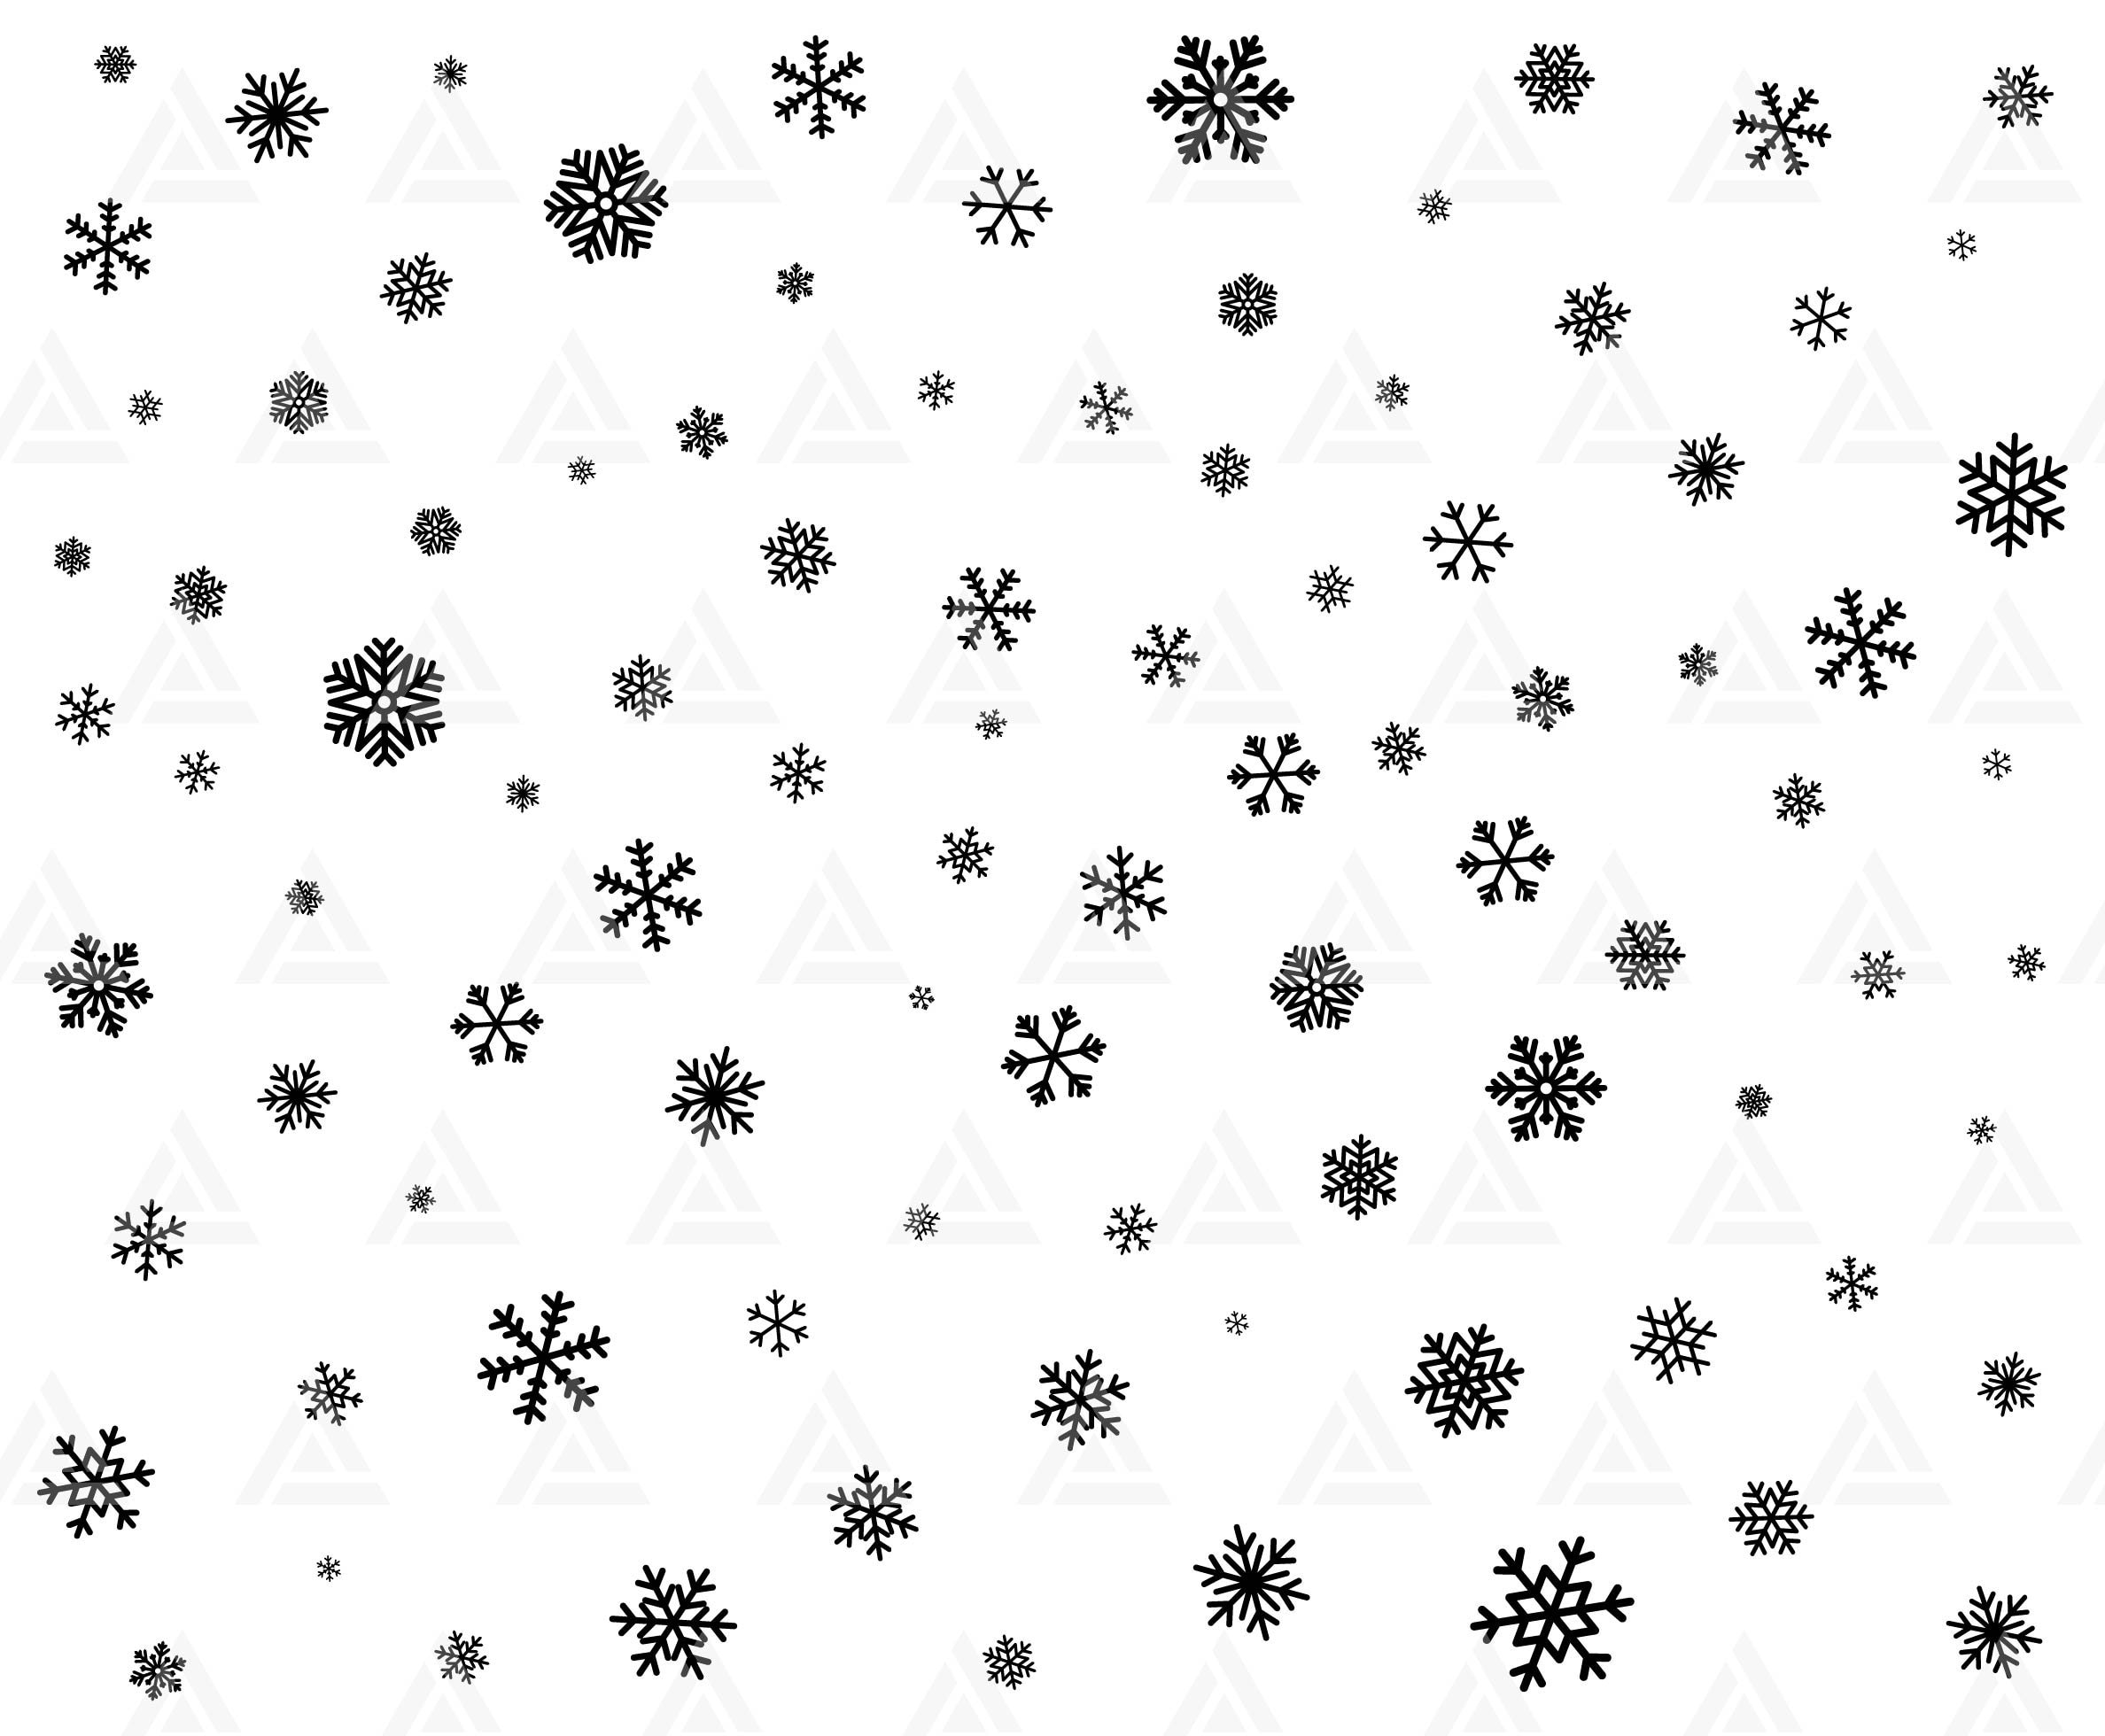 Nordic snowflakes on a red background printed on 5/8 white single face  satin, 10 yards